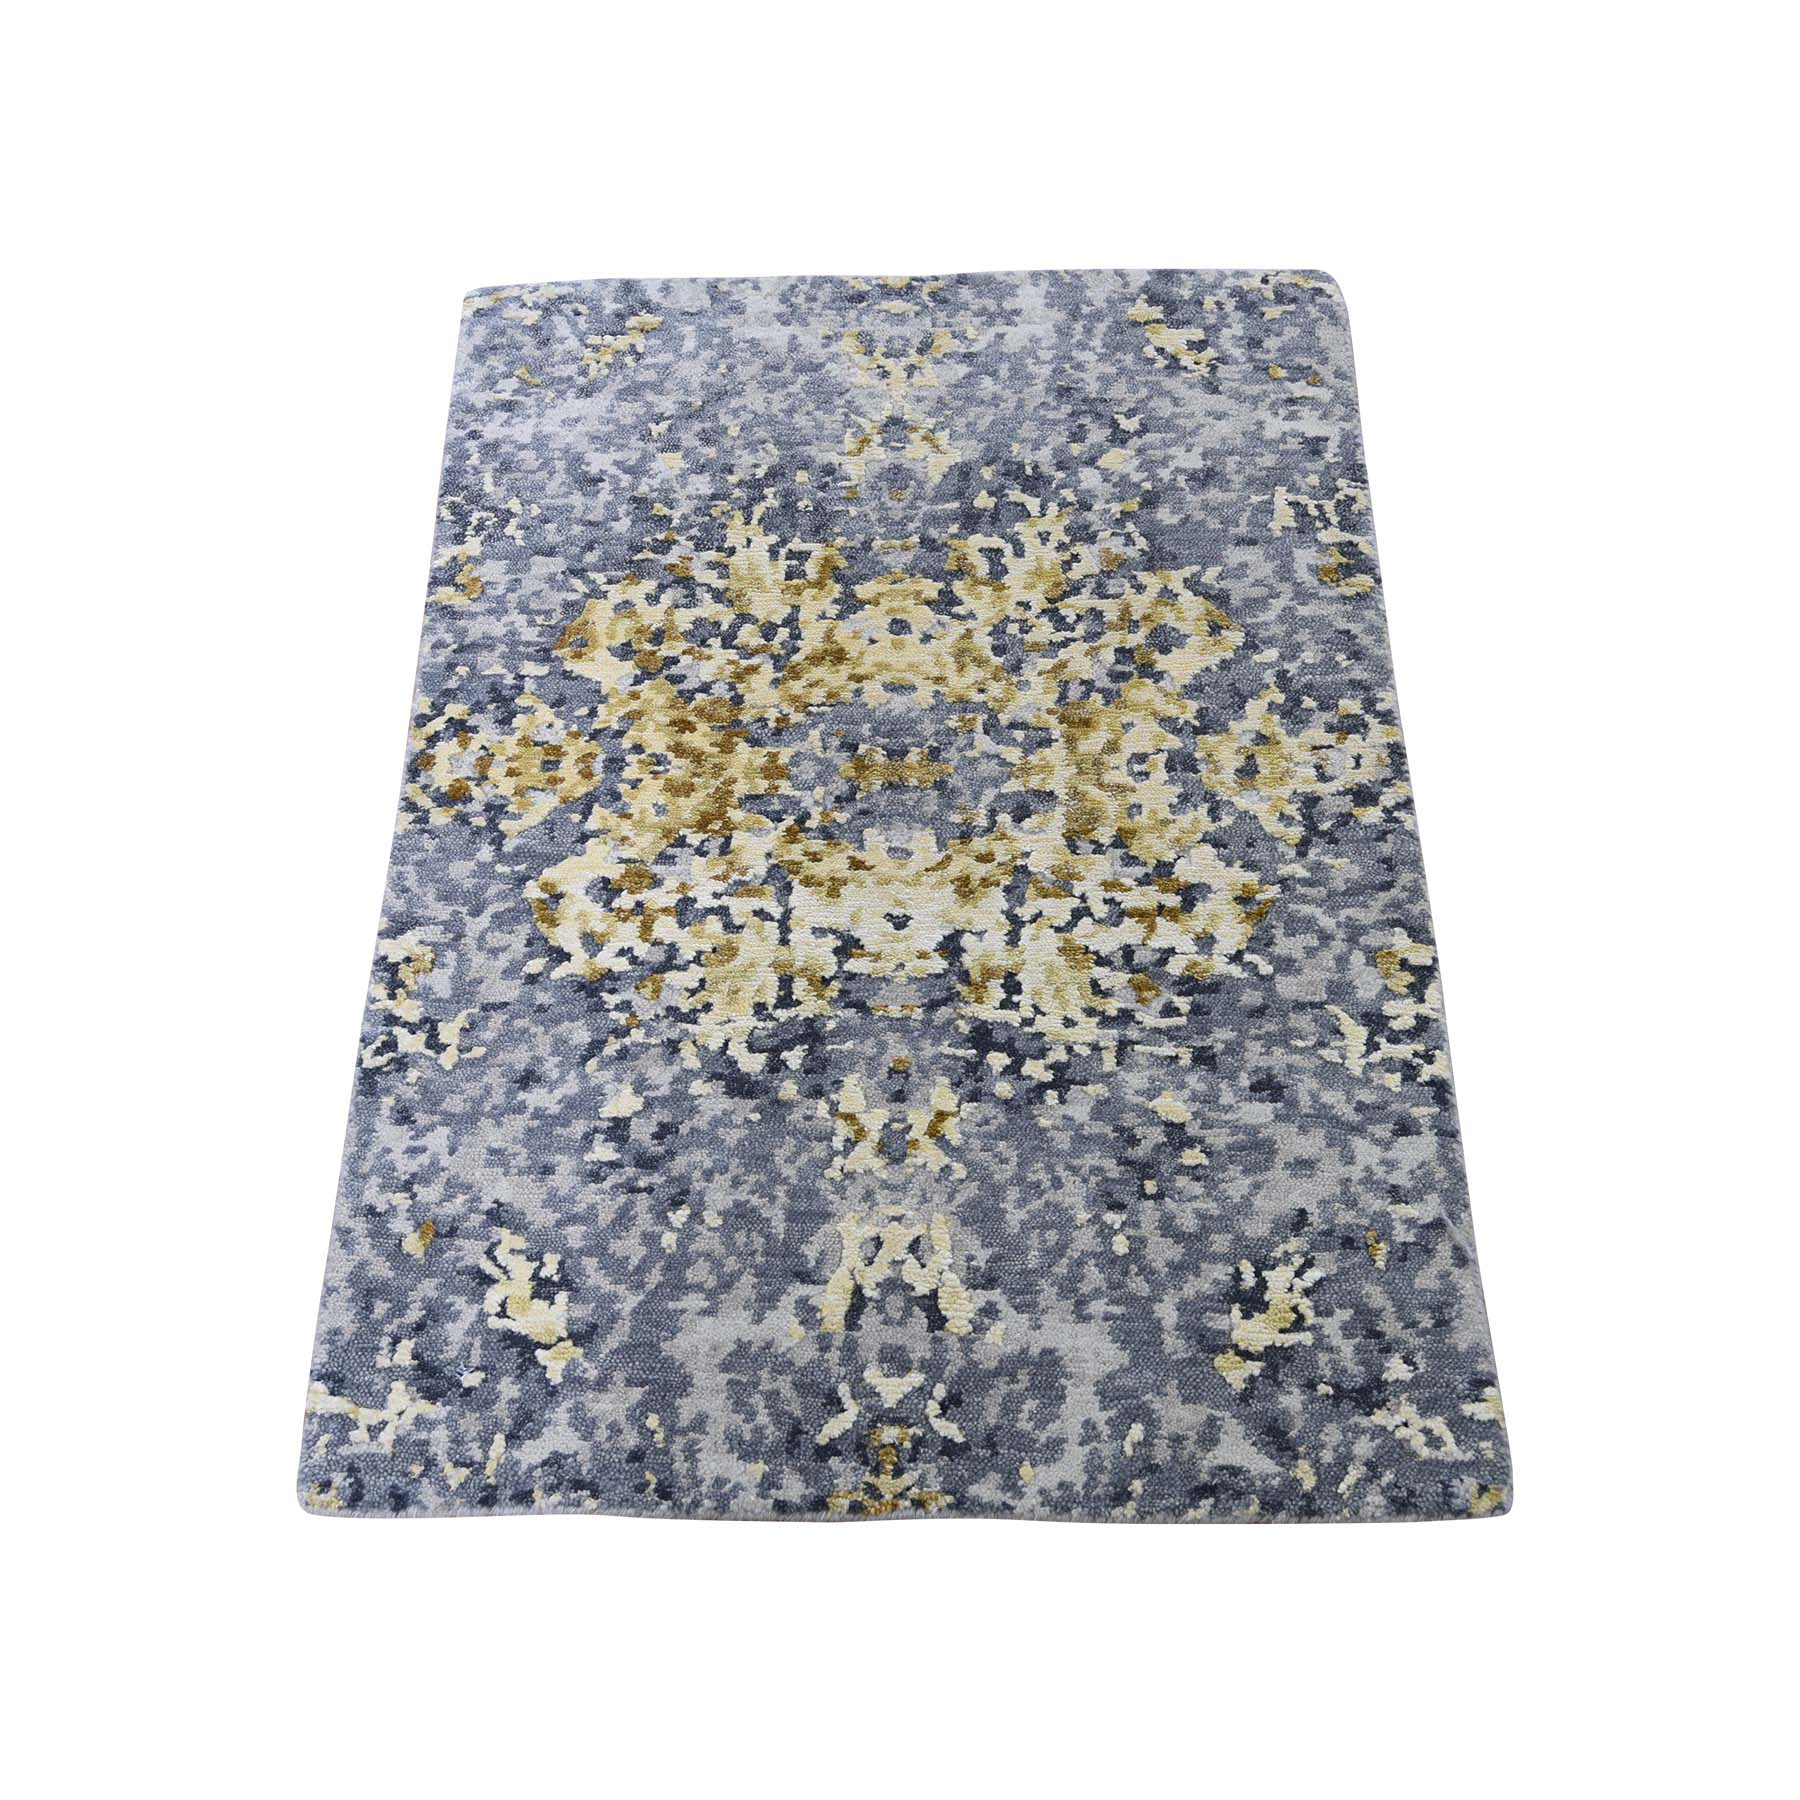 2-x3- Wool And Silk Abstract Design Hand-Knotted Modern Oriental Rug 